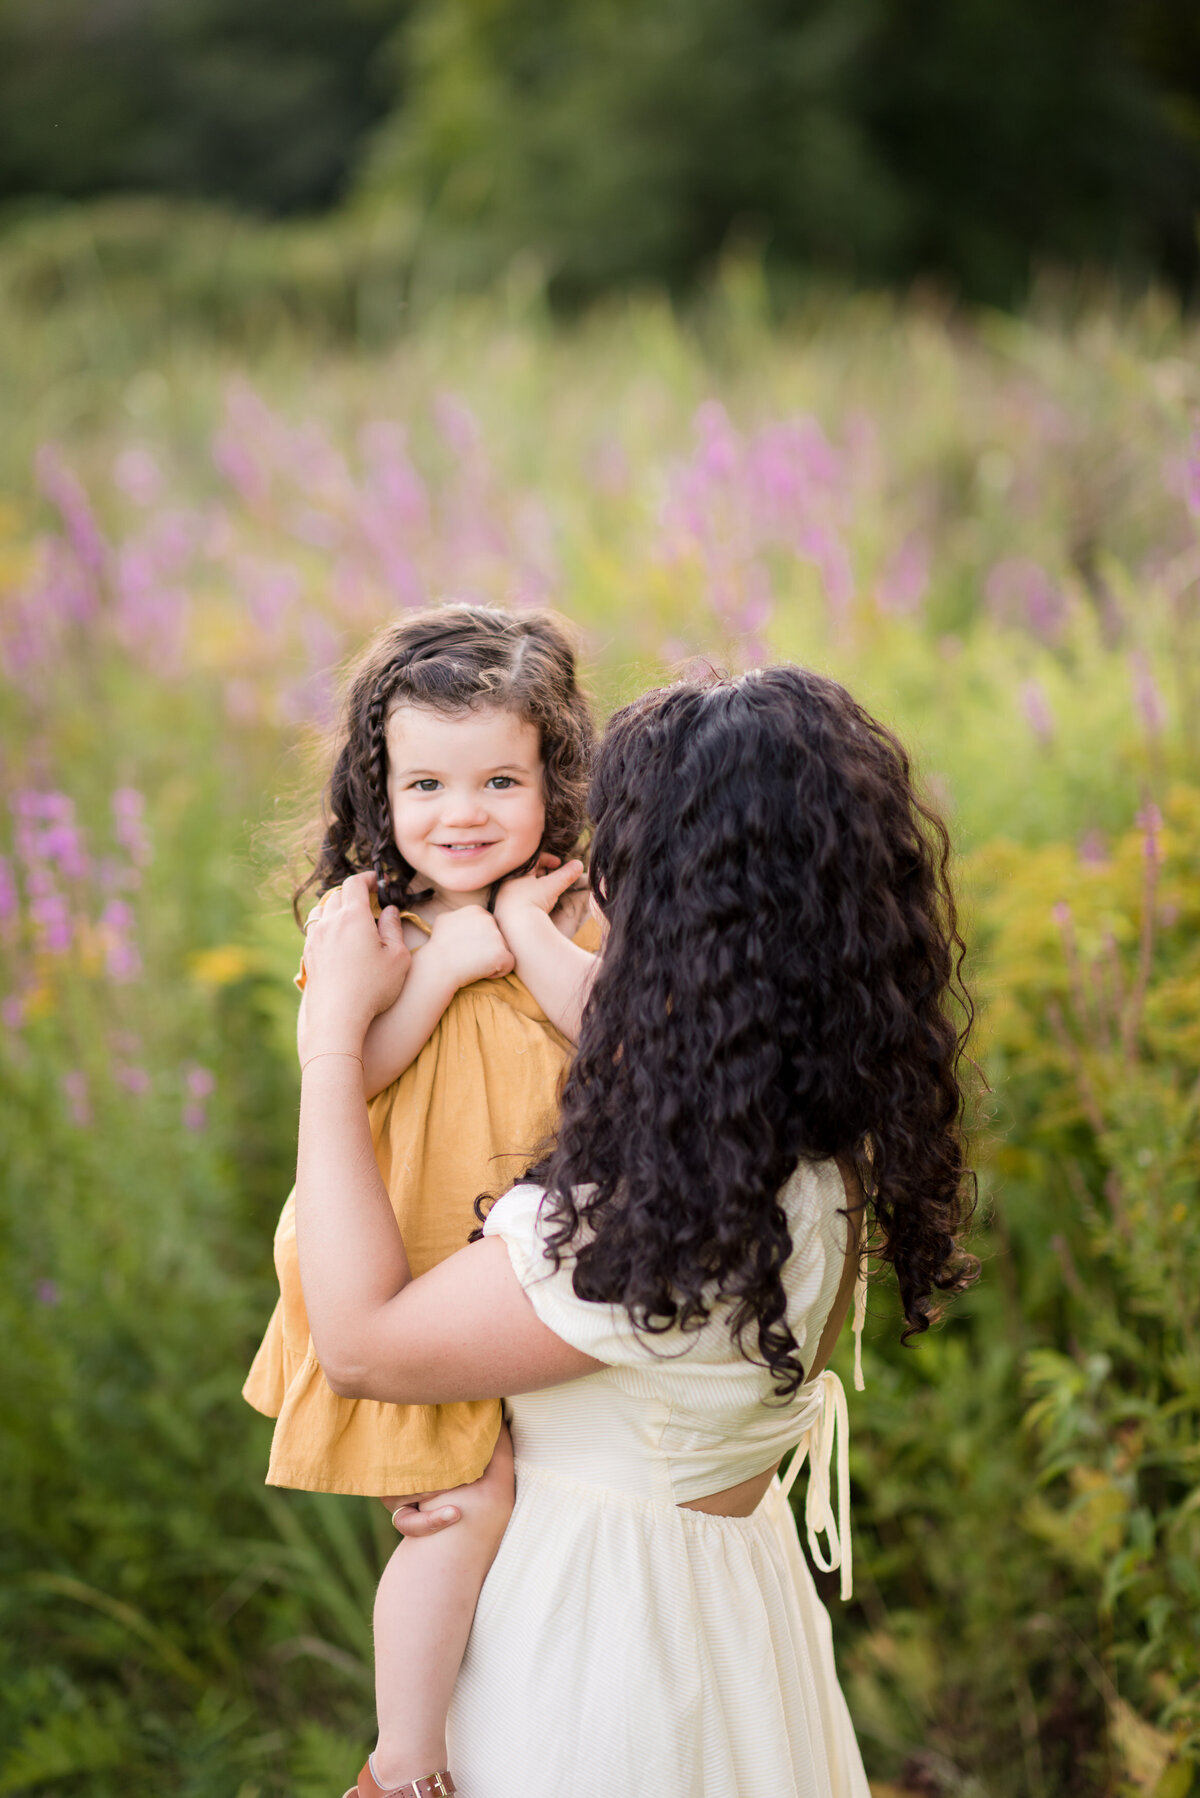 Boston-family-photographer-bella-wang-photography-Lifestyle-session-outdoor-wildflower-59